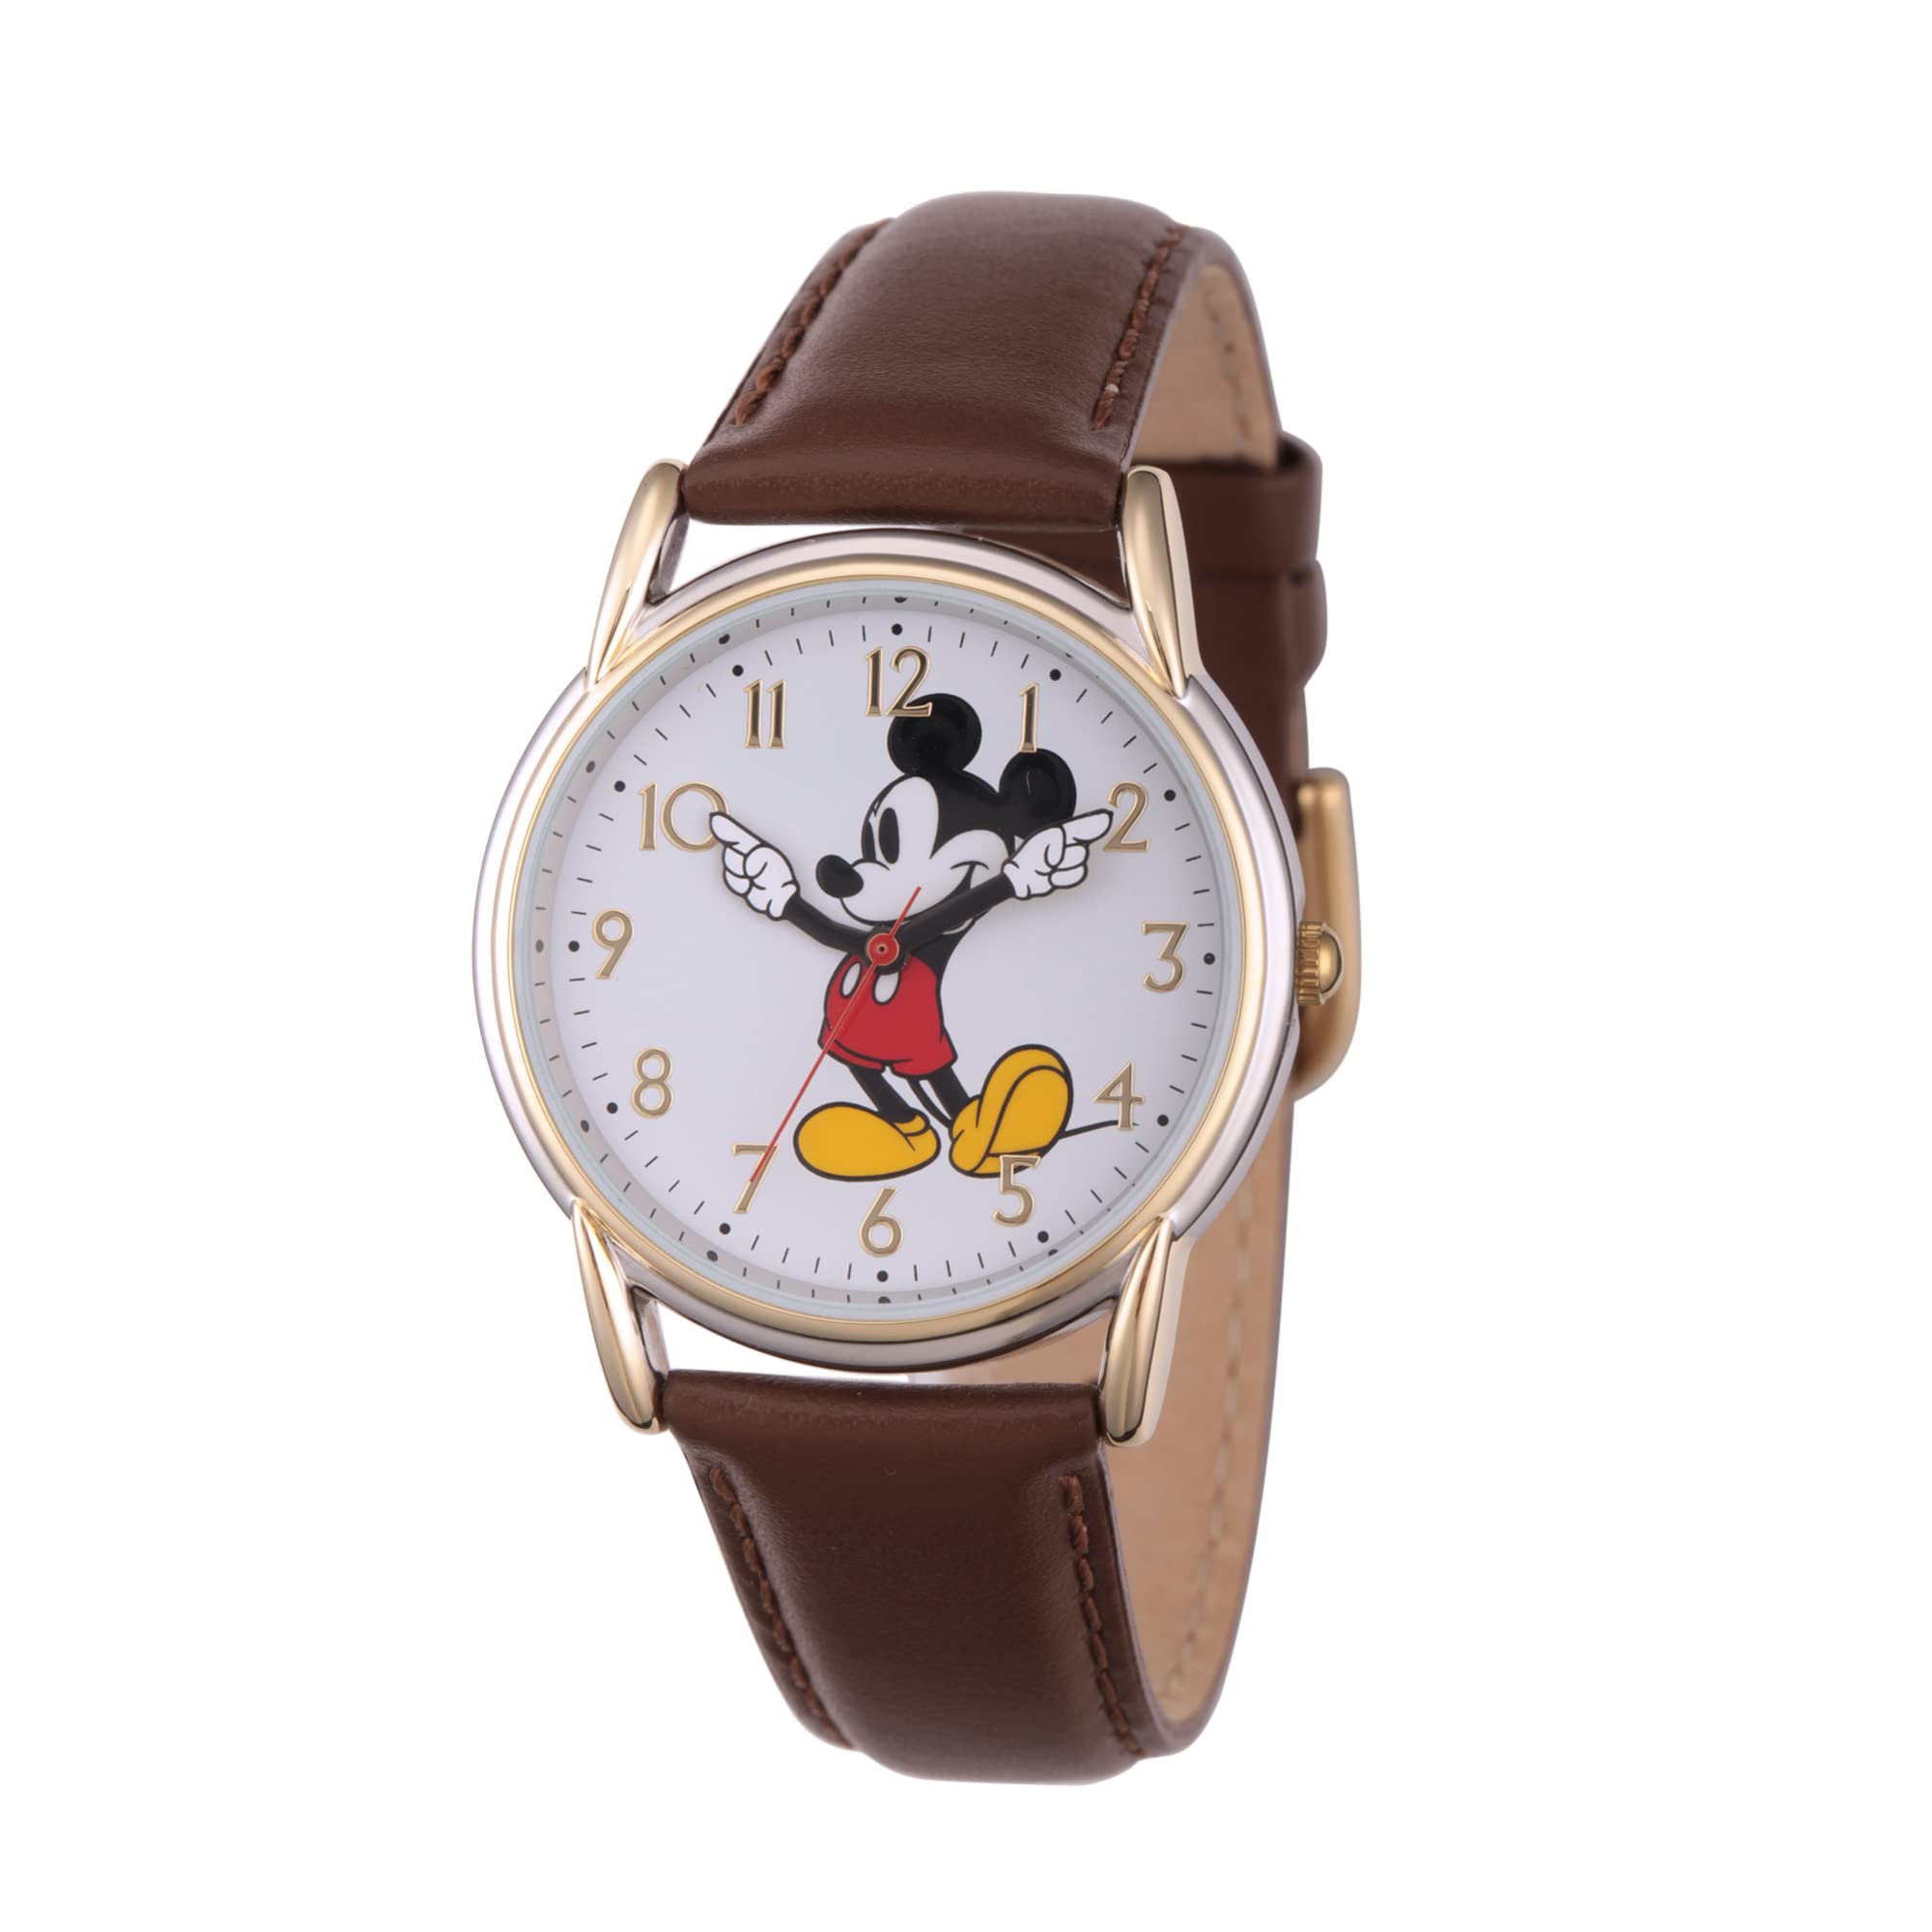 Disney Mickey Mouse Adult Classic Cardiff Articulating Hands Analog Quartz Leather Strap Watch